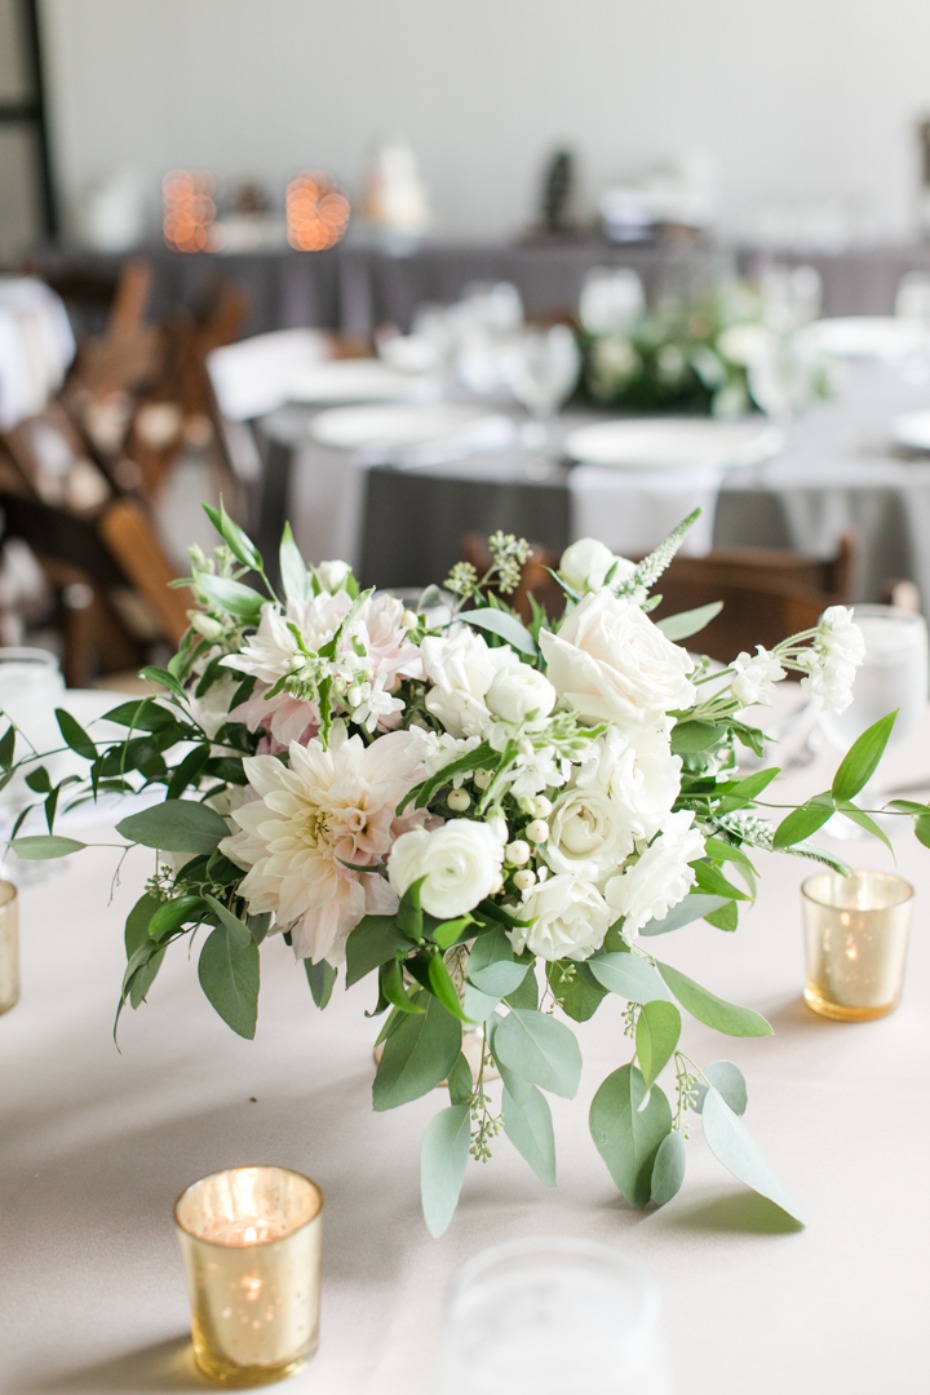 White floral centerpiece with candles